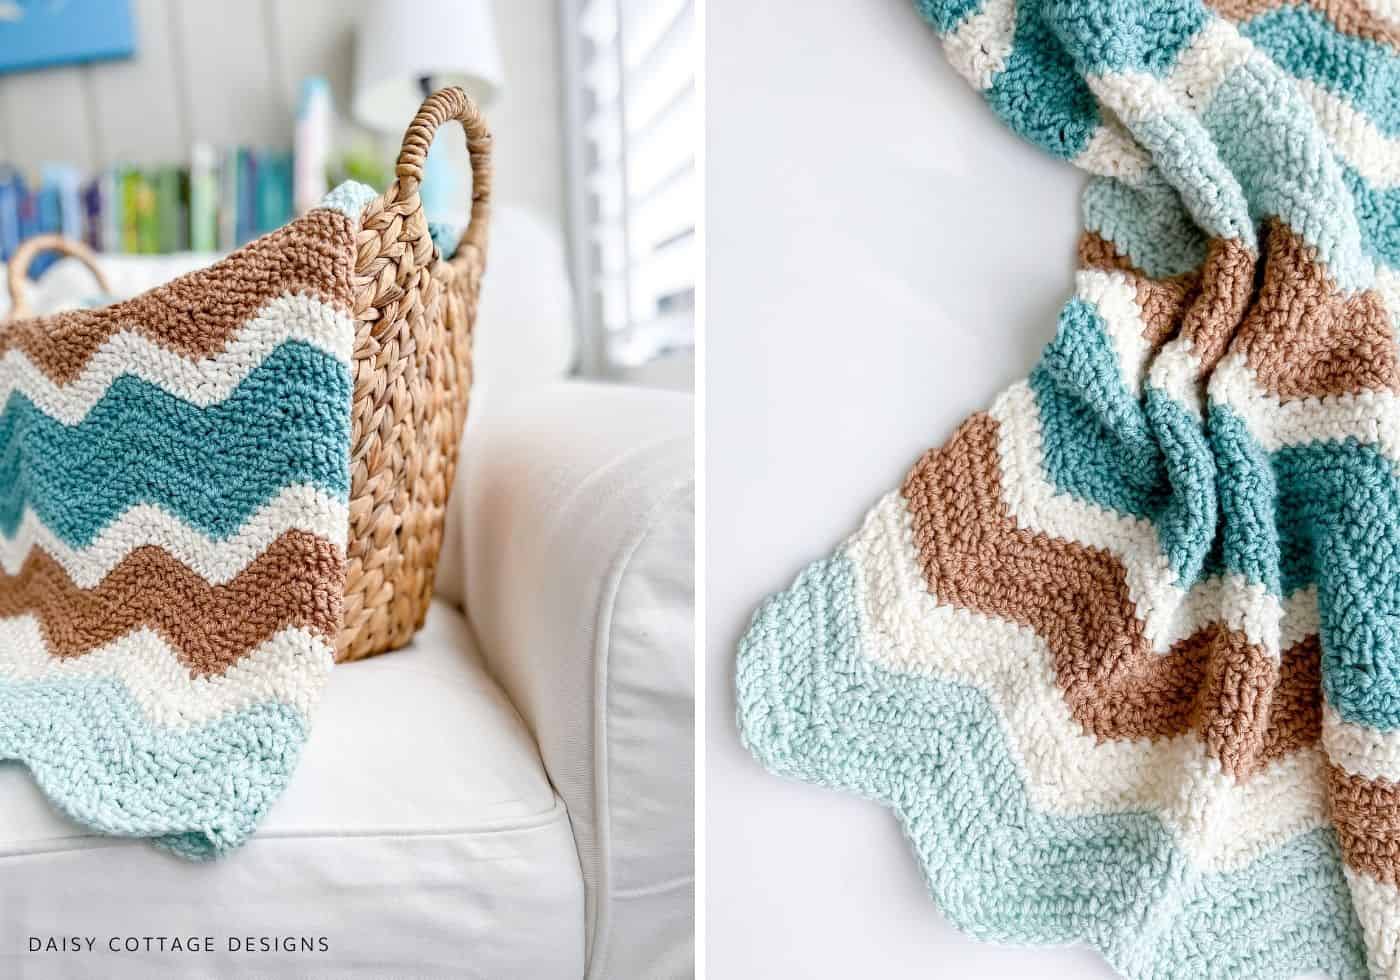 A Colorful Blanket made with 24/7 Cotton!